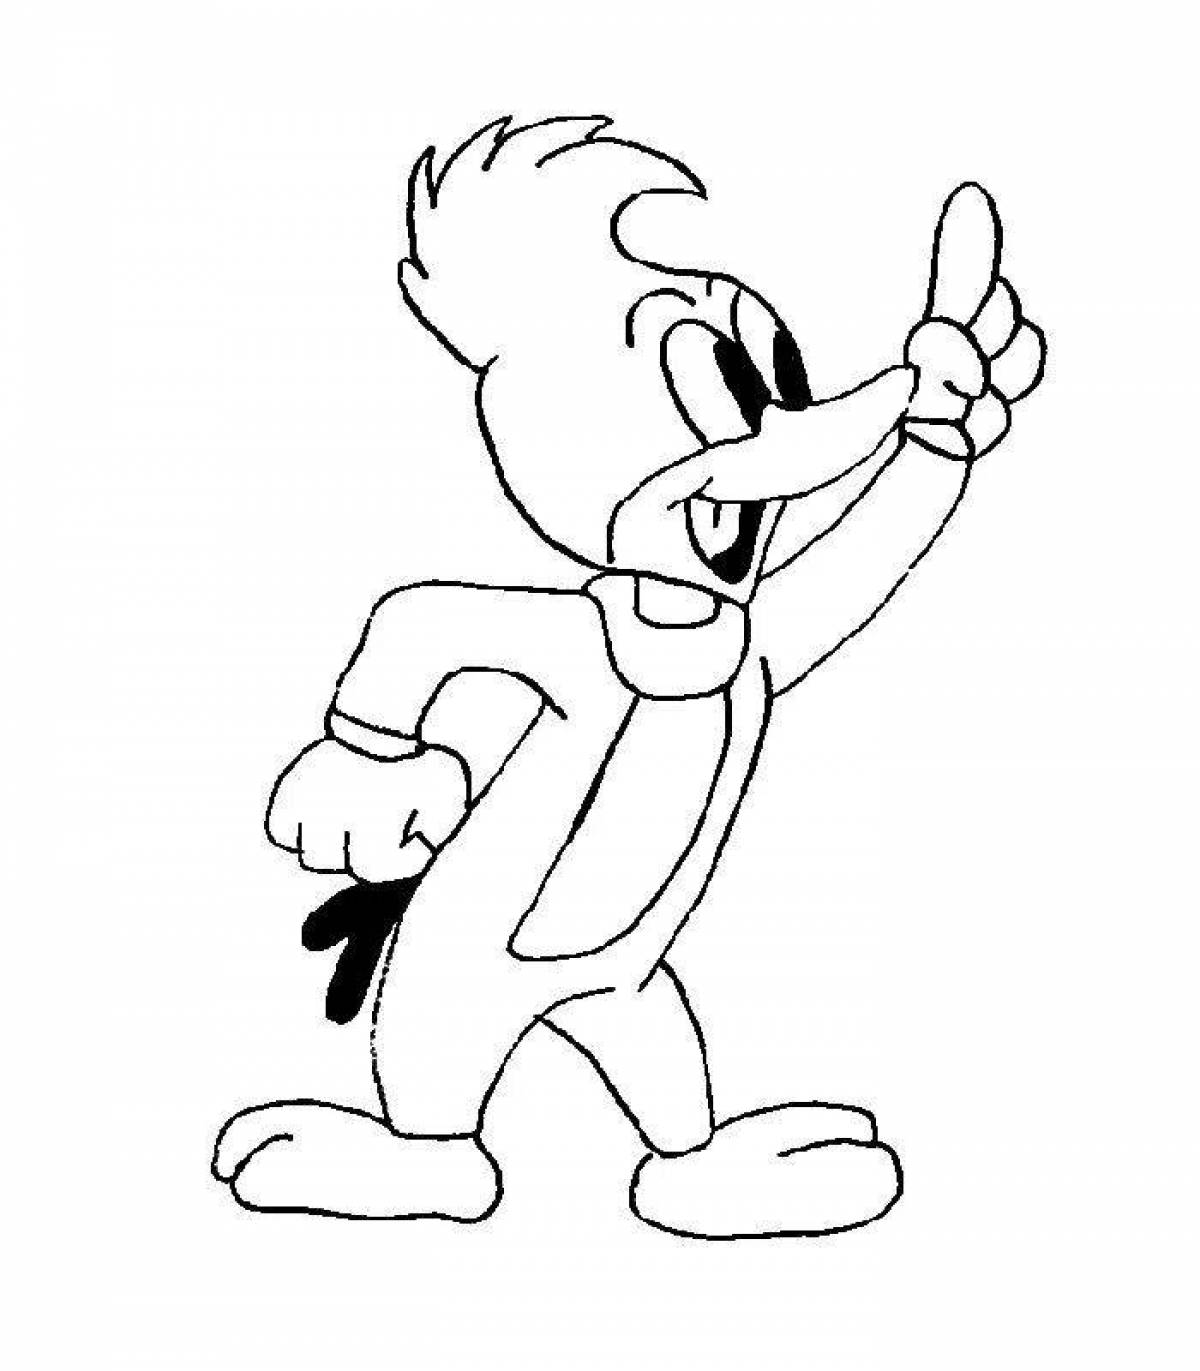 Charming woody woodpecker coloring book